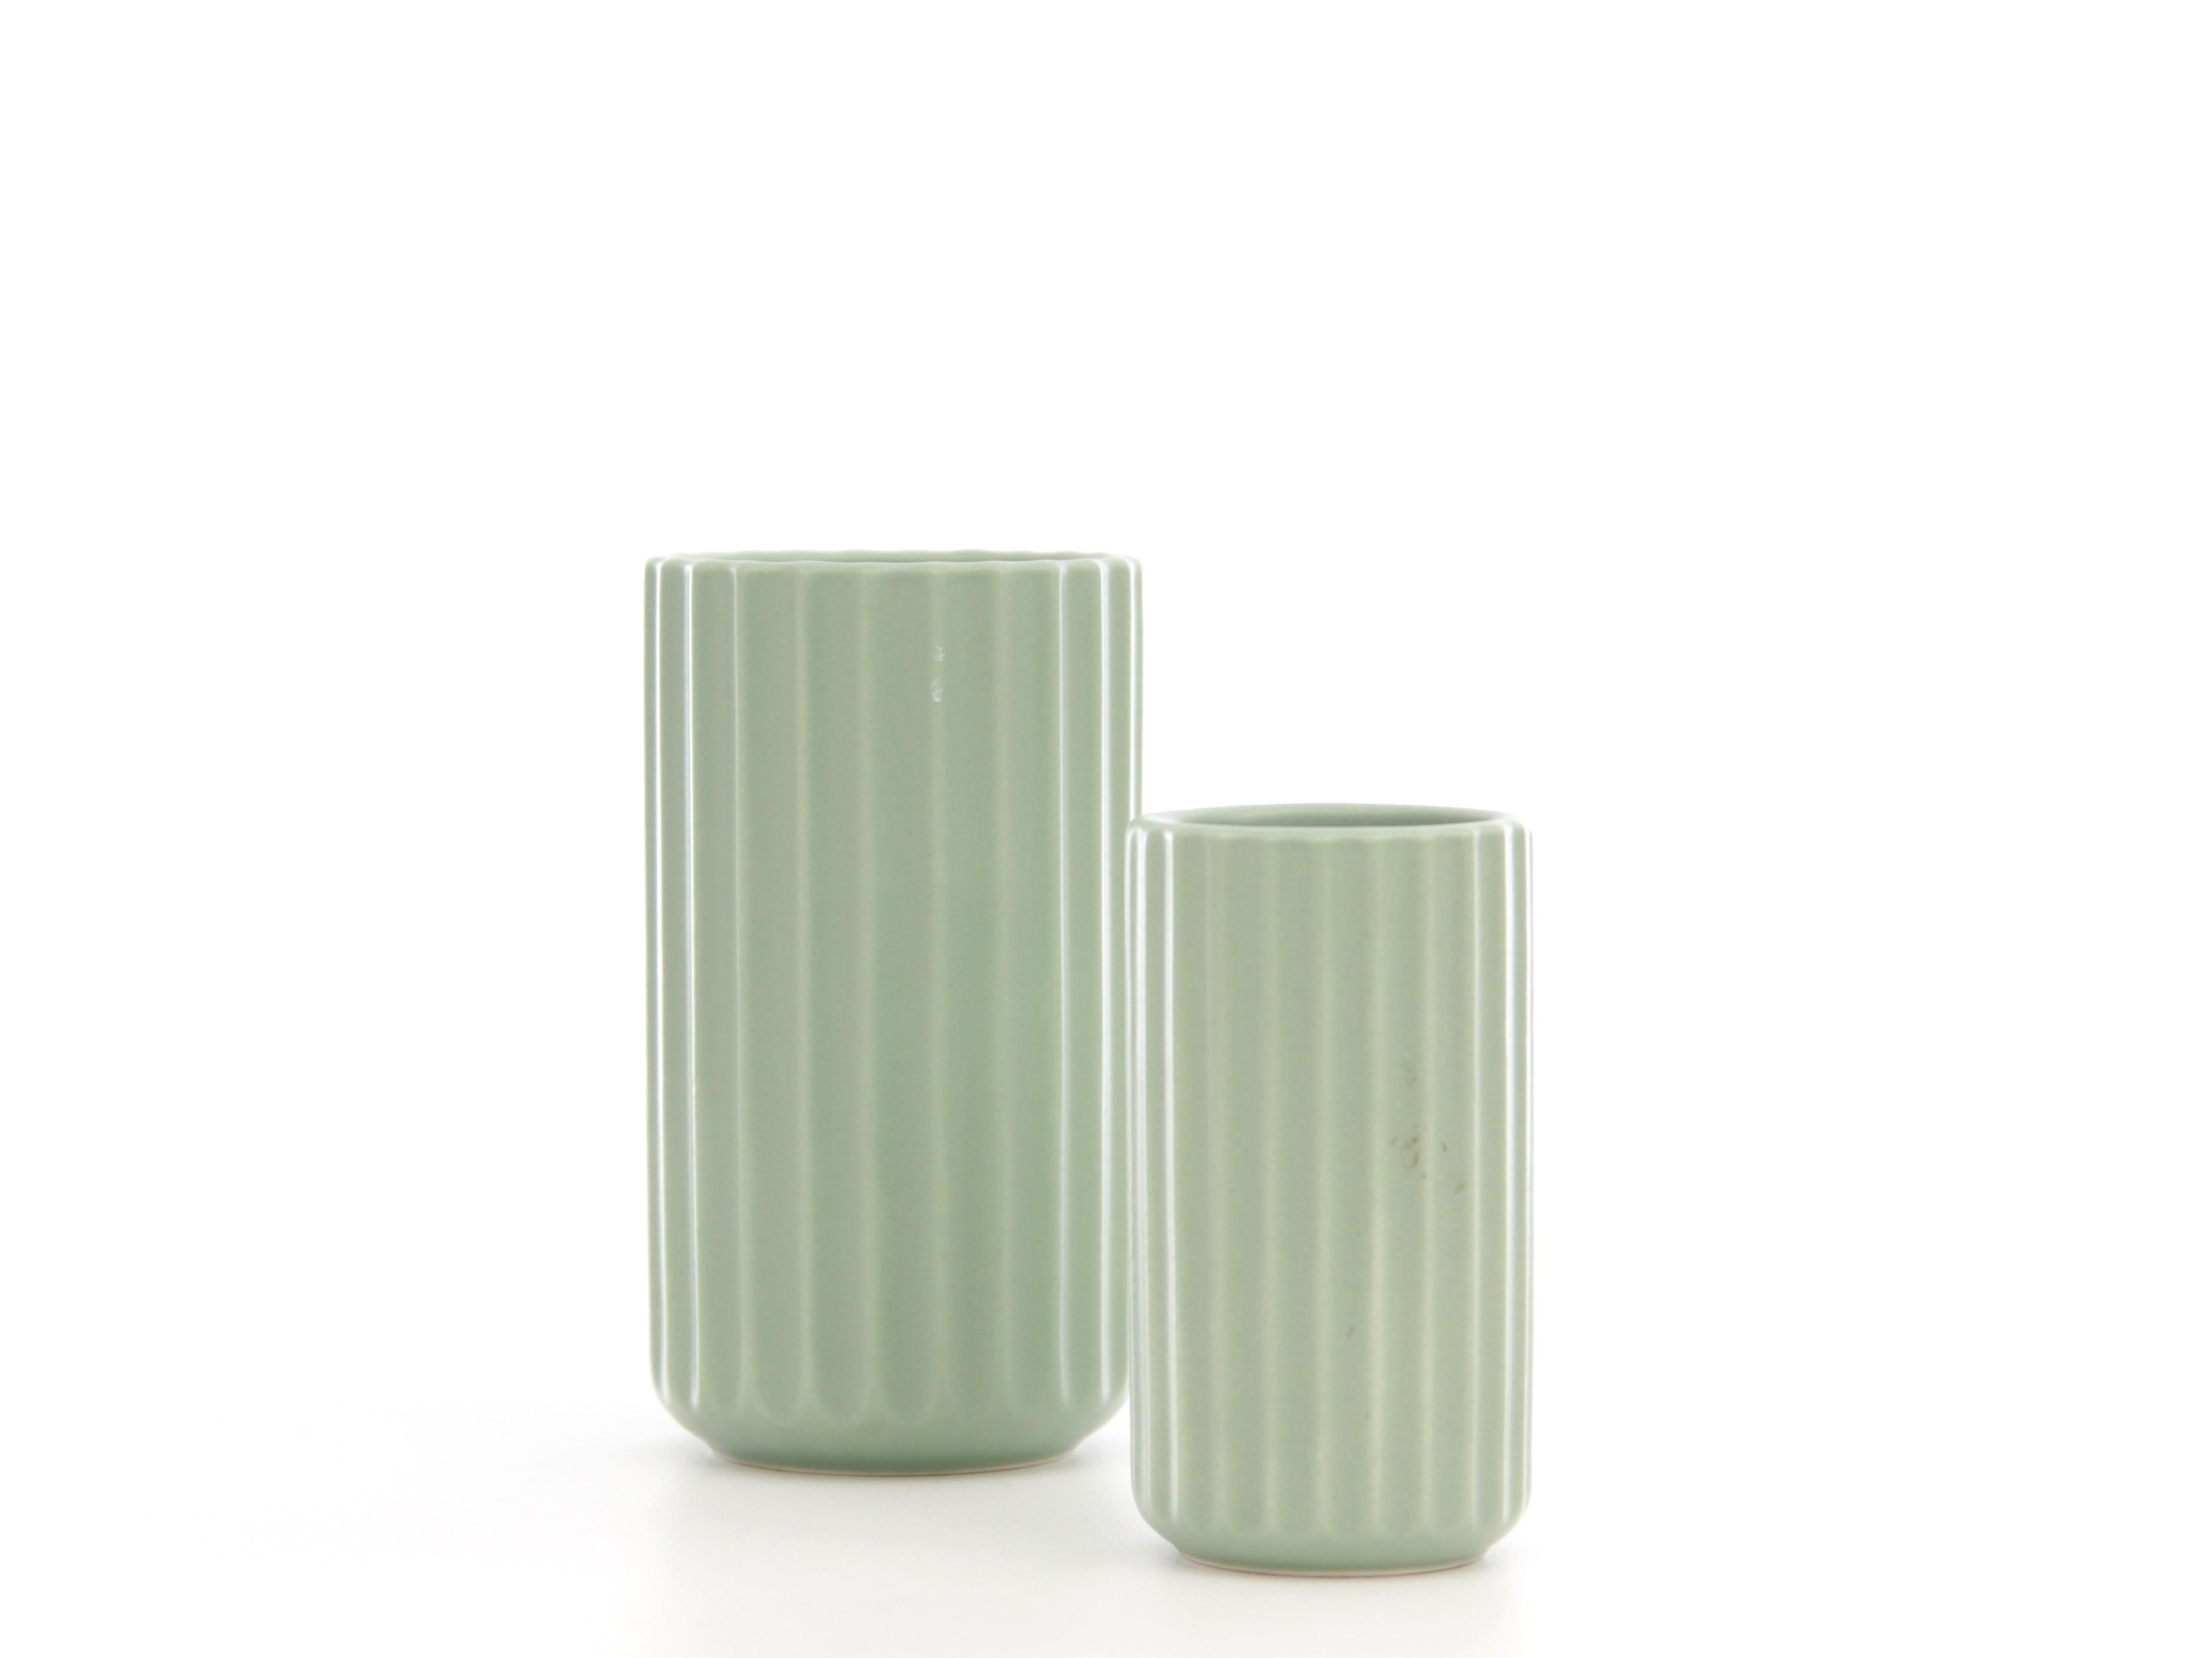 Set of two small iconic vases by Lyngby Porcelain. Manufactured from 1936 to 1969 in Denmark and reissued from 2012. These two small vases are originals

Small vase: H 9 cm. Ø 5 cm. Large vase : H 12 cm. Ø 7 cm.